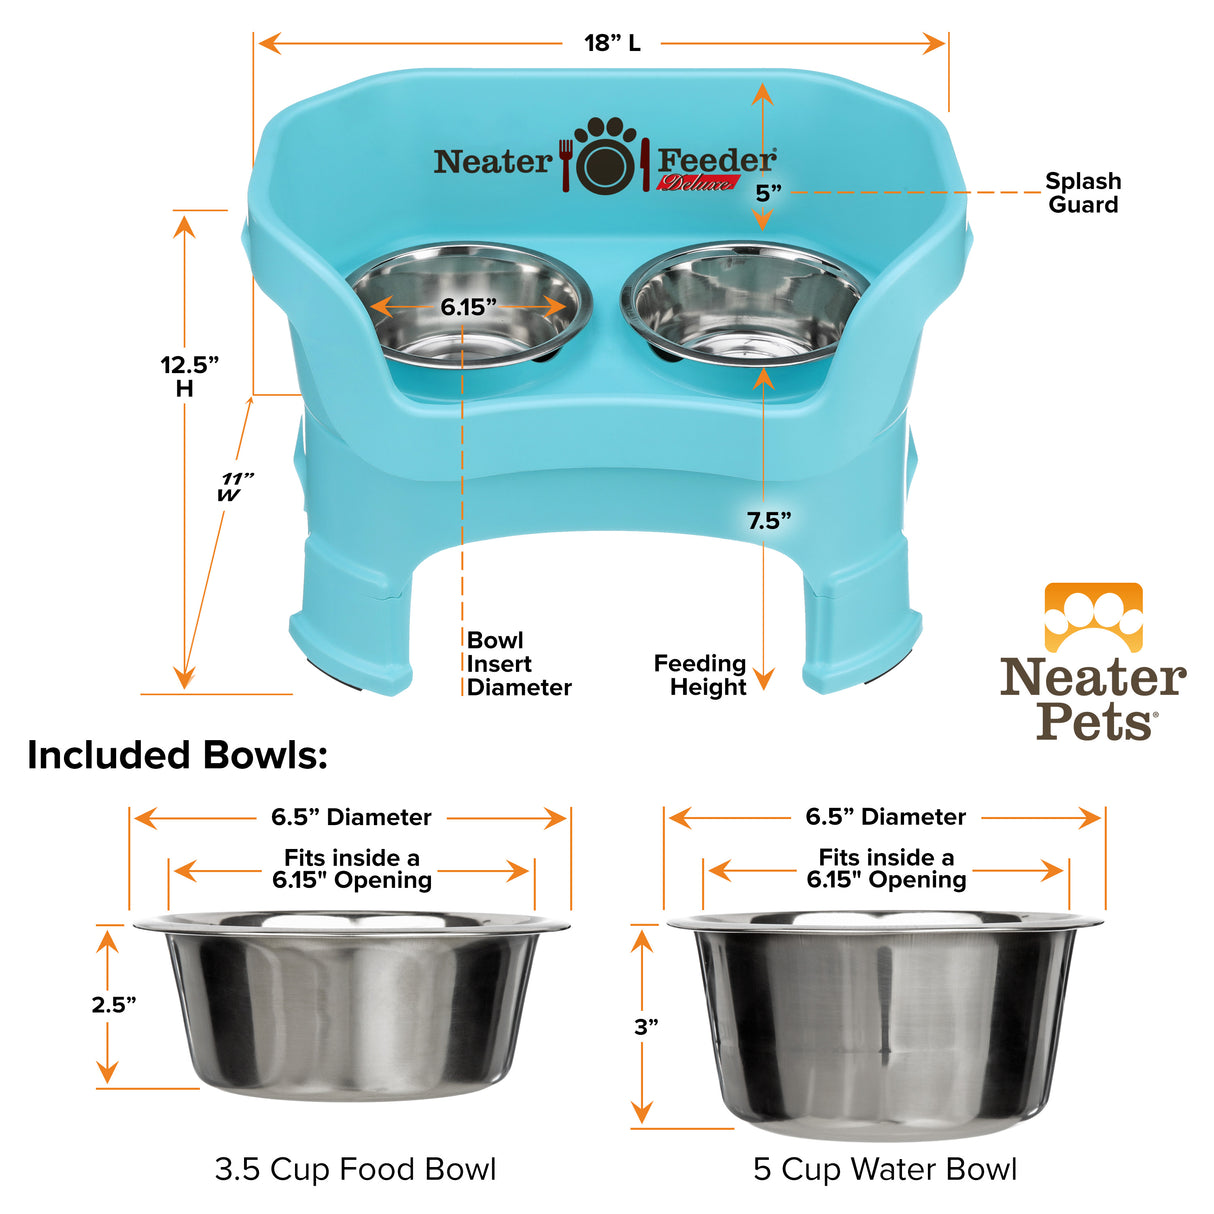 Deluxe Aqua Medium Dog Neater Feeder with leg extensions and Bowl dimensions